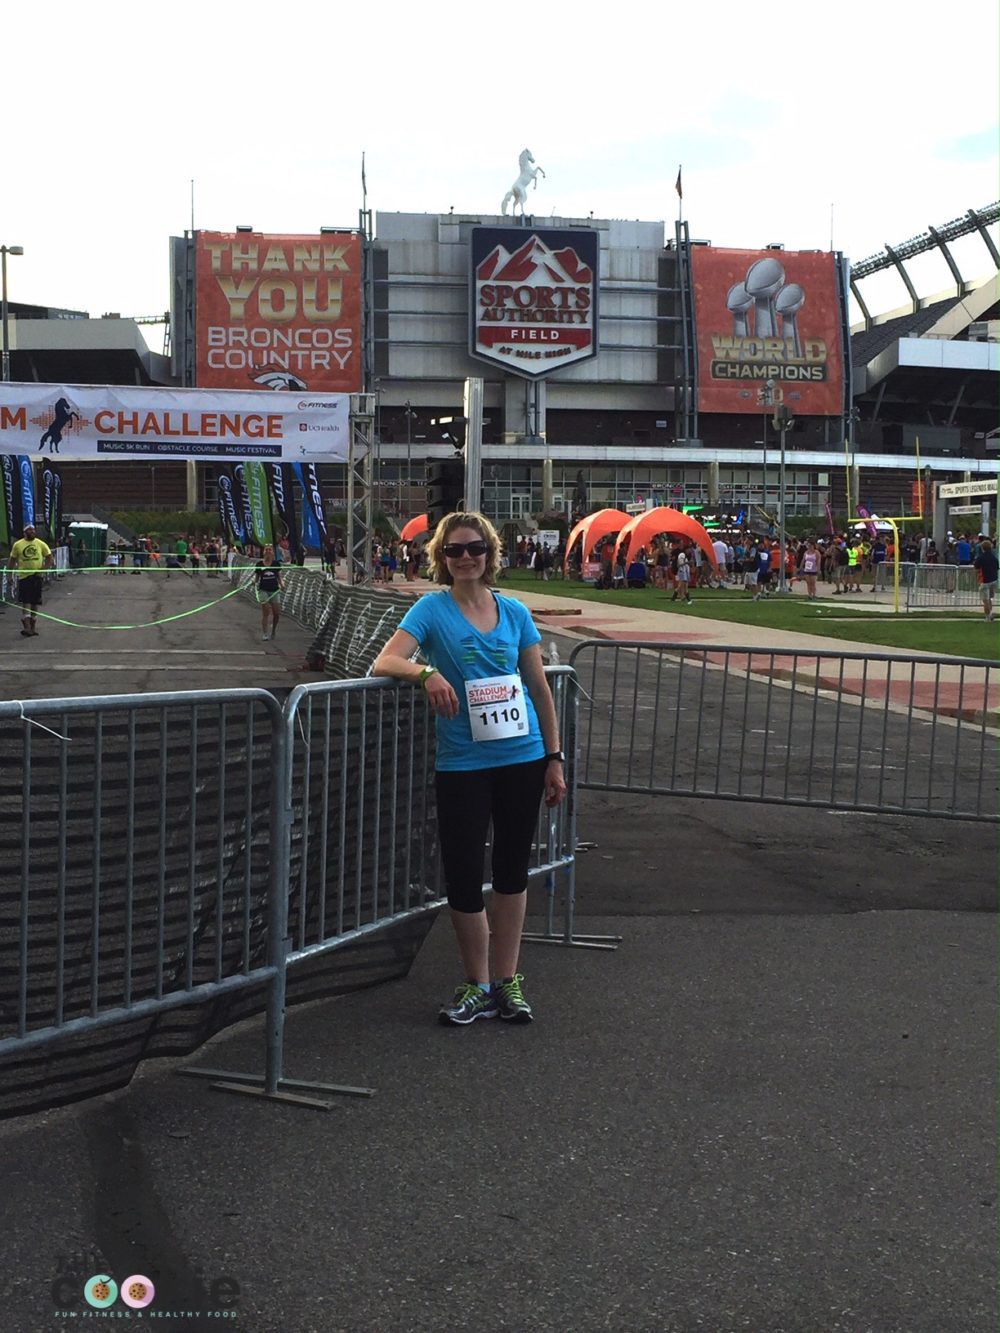 Looking for a fun event in Colorado? Check out my Broncos Stadium Challenge Recap! - #ad @24hourfitness #Rock24Life #LivetheBeat #24hourfitness #race